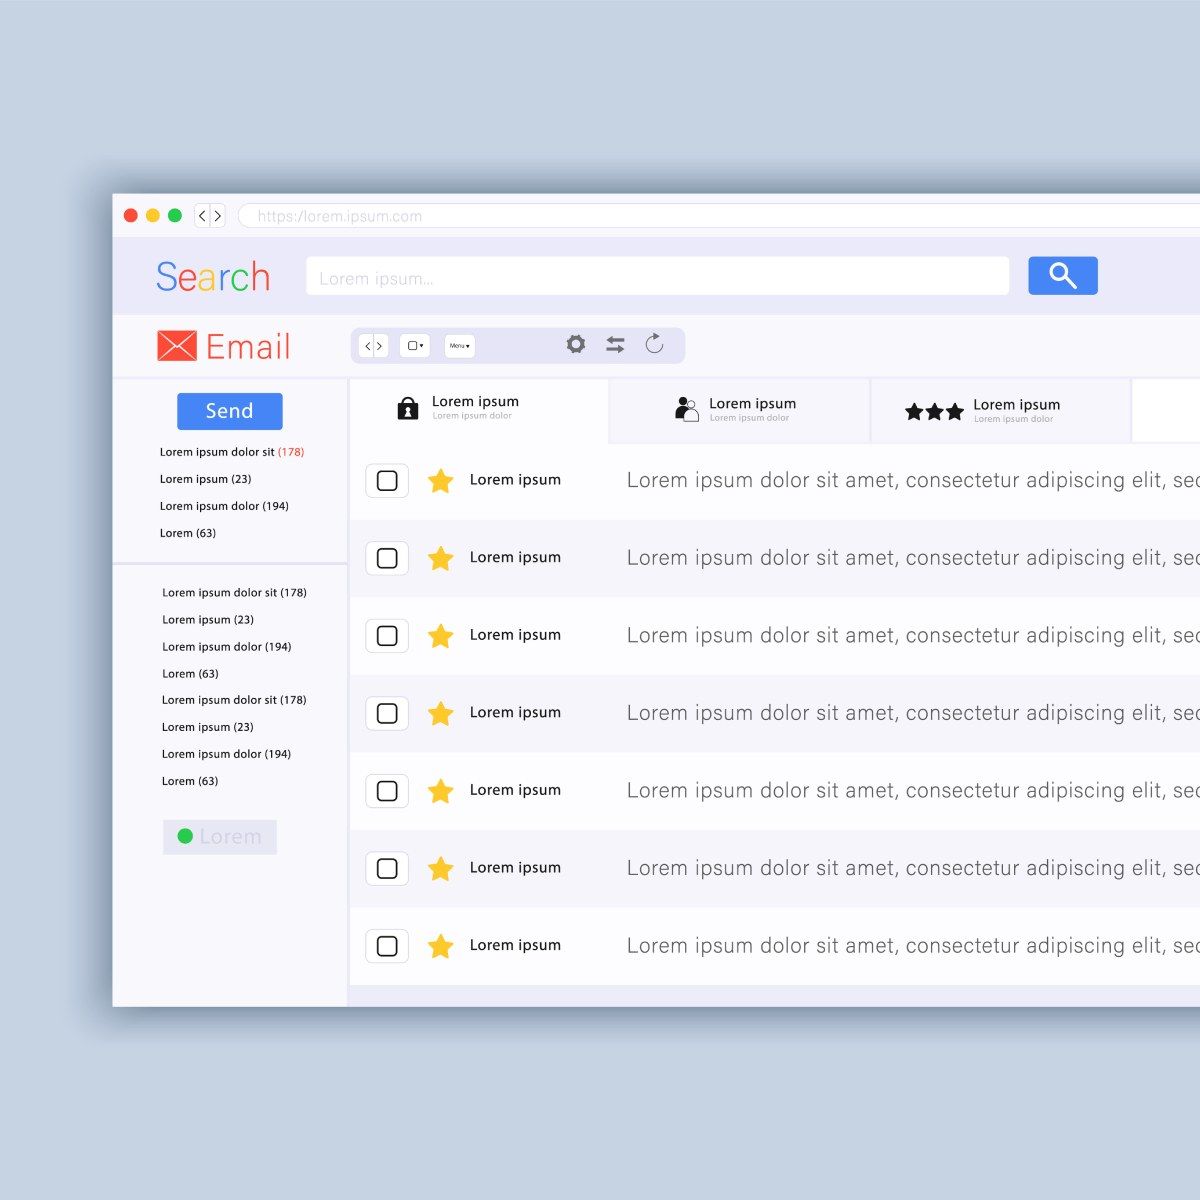 An illustration of an email inbox with starred, unread messages